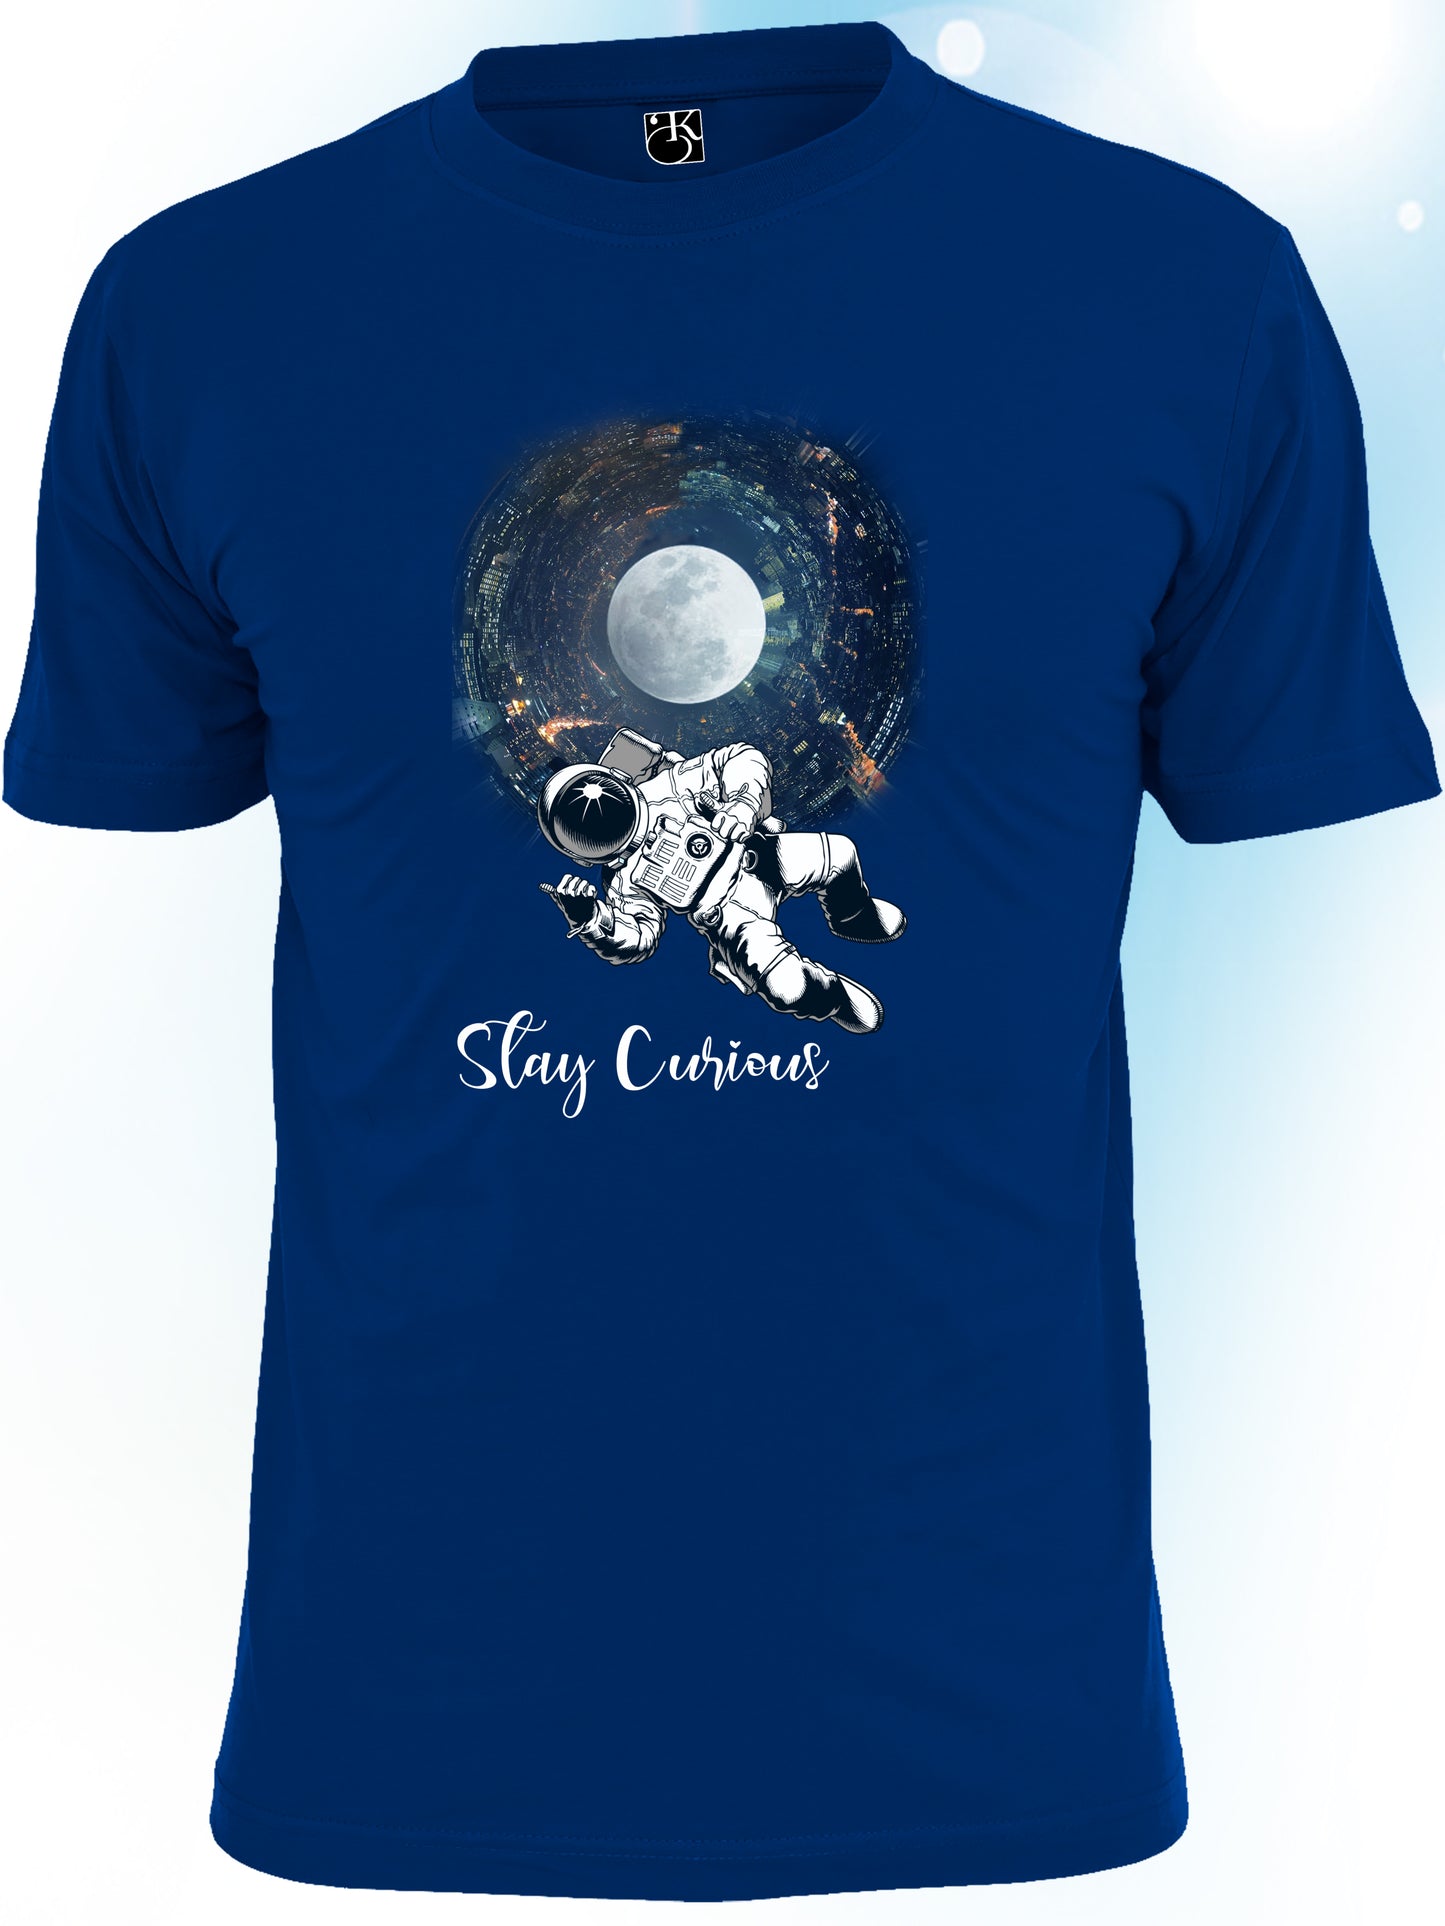 Stay Curious T-Shirt